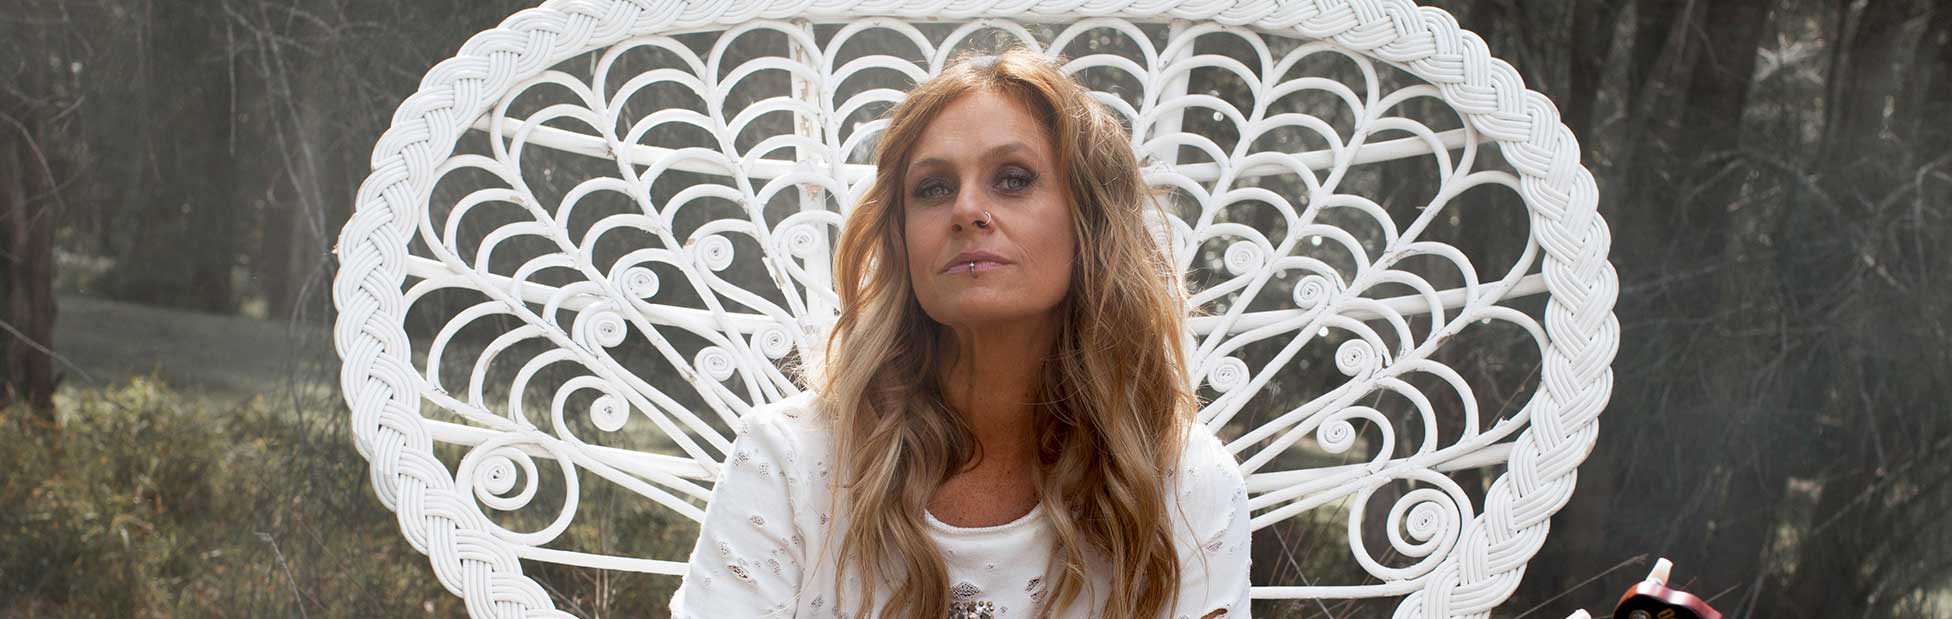 Kasey Chambers sitting in large white chair